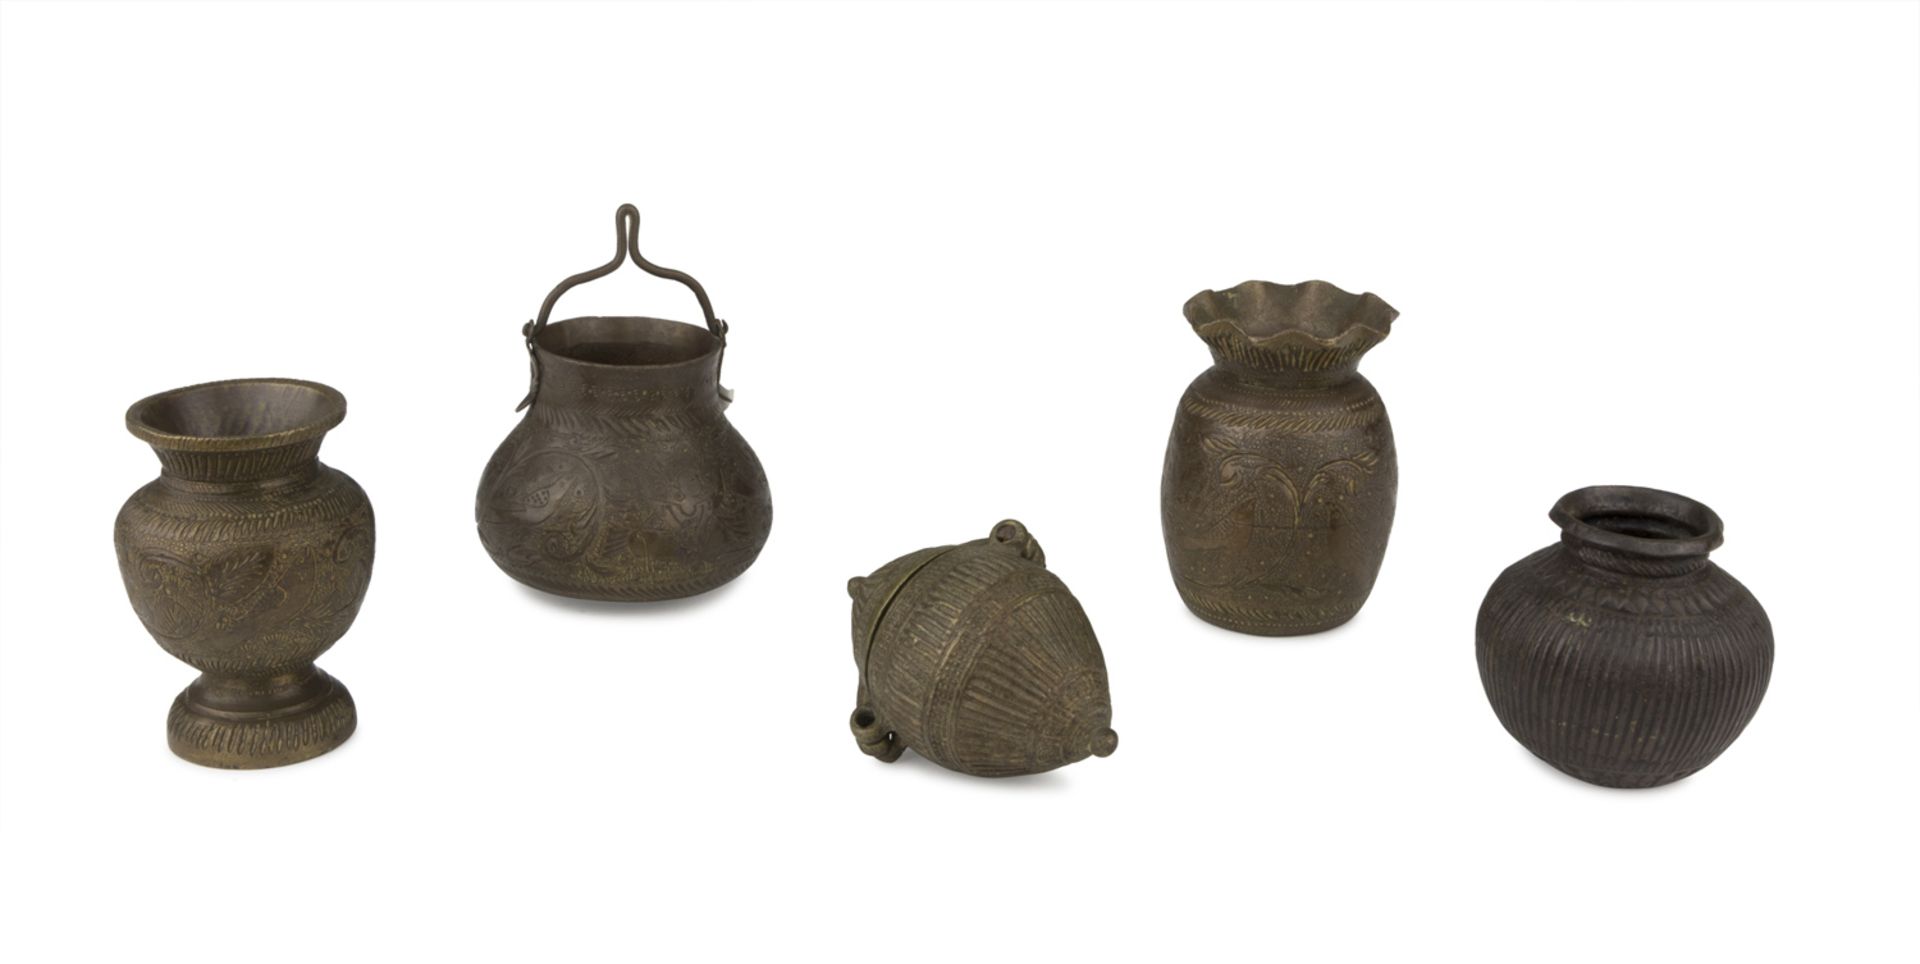 FIVE SMALL BRONZE CONTAINERS INDIA FIRST HALF OF THE 20TH CENTURY